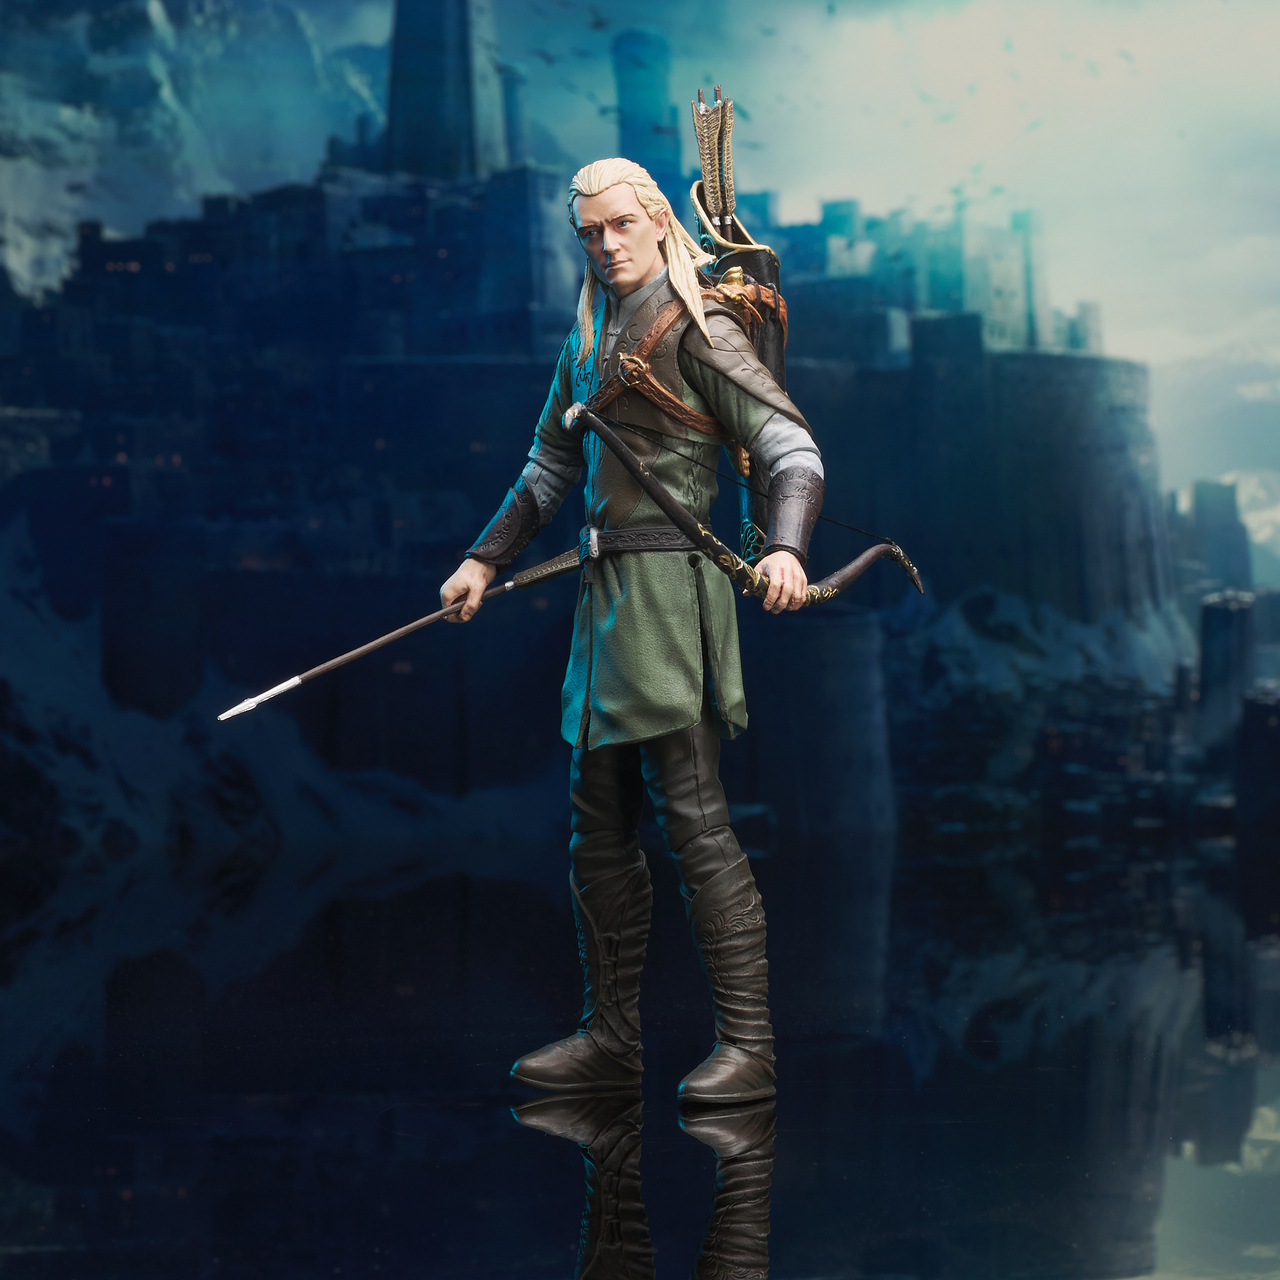 Lord of the Rings Select Actionfigur 18 cm Legolas  699788838570